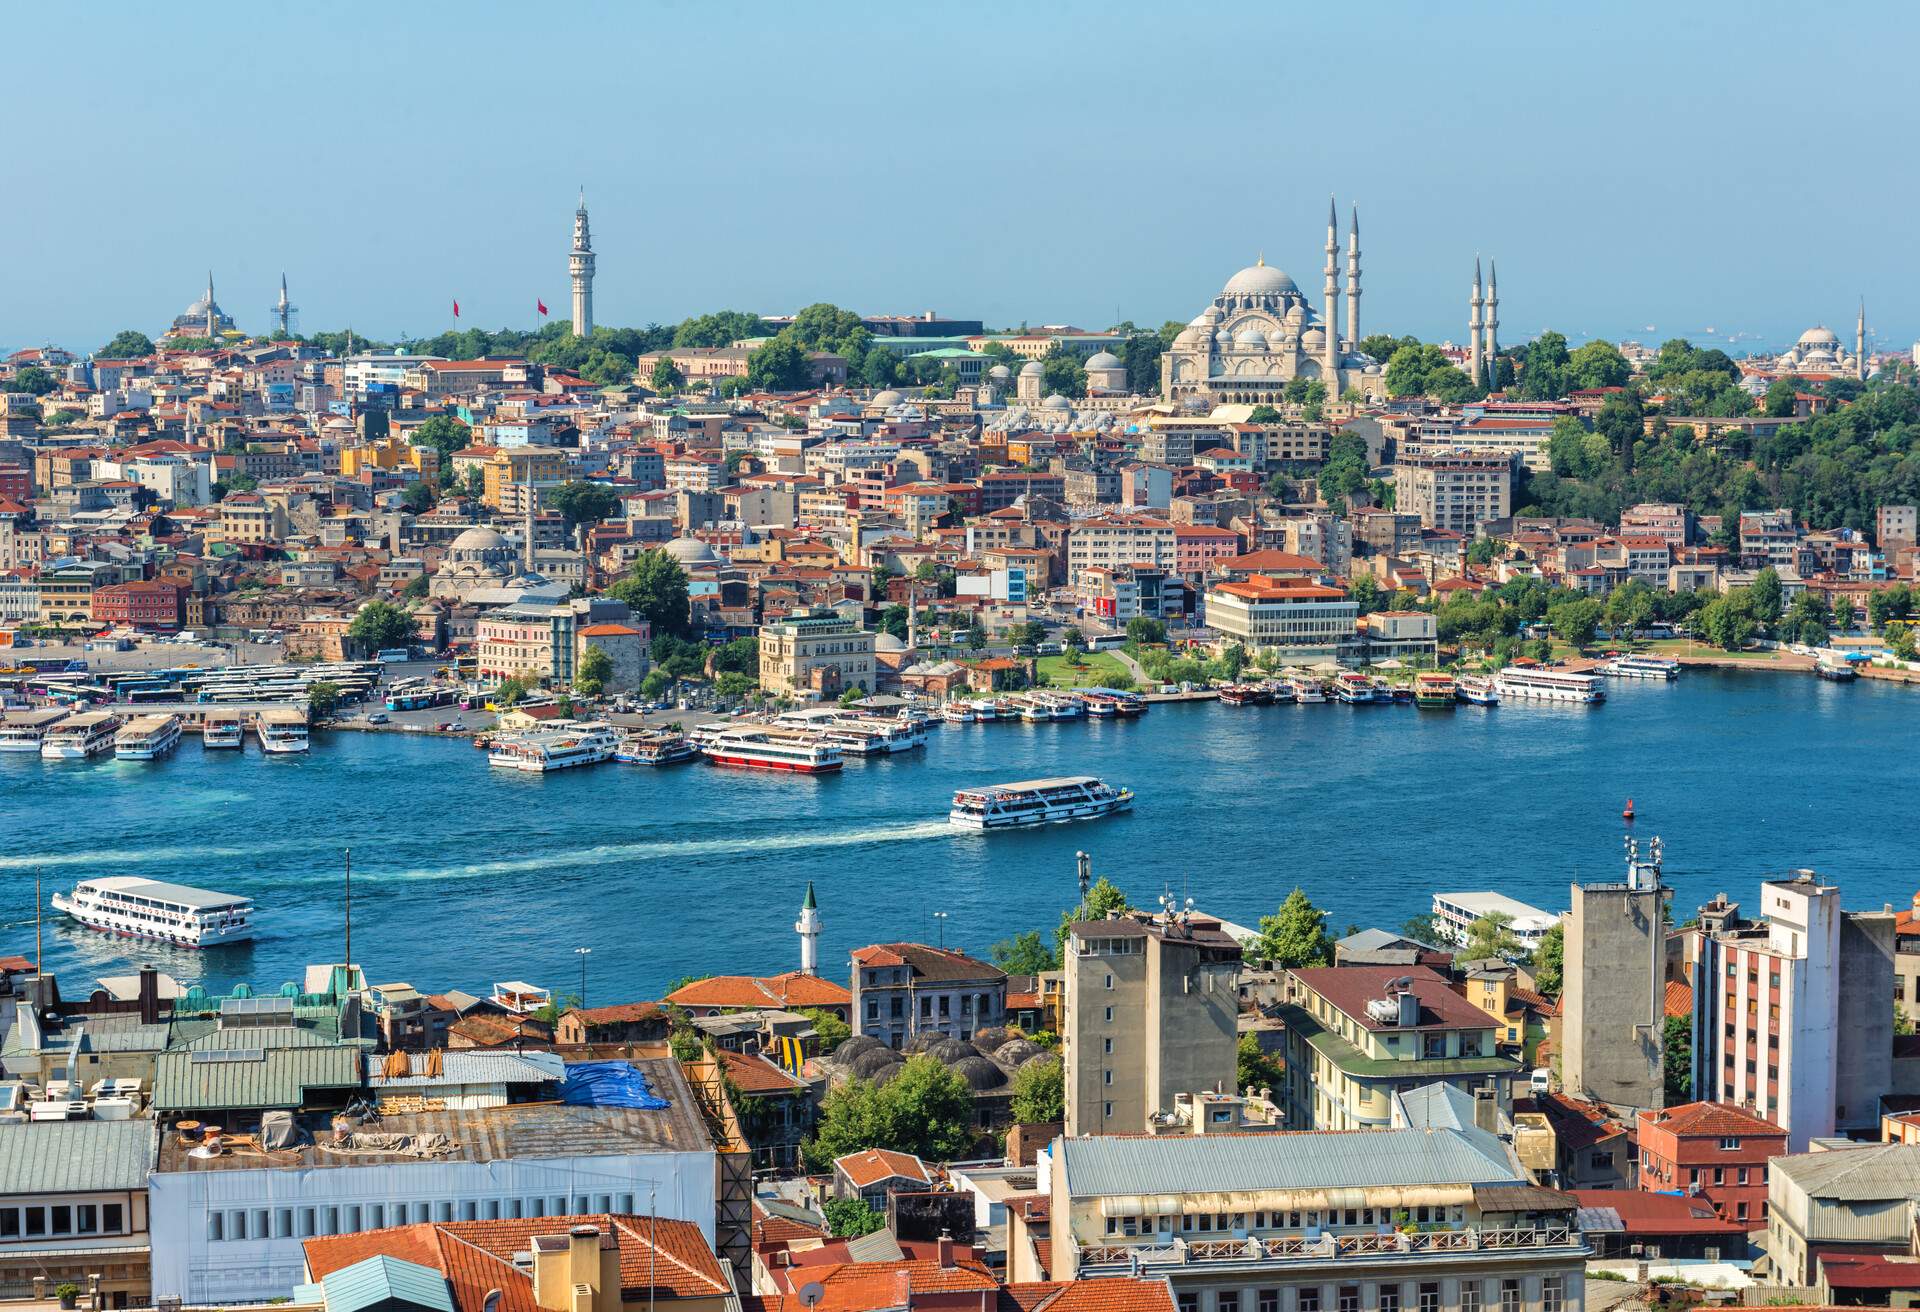 Ferry ships sail up and down the Golden Horn in Istanbul, Turkey.